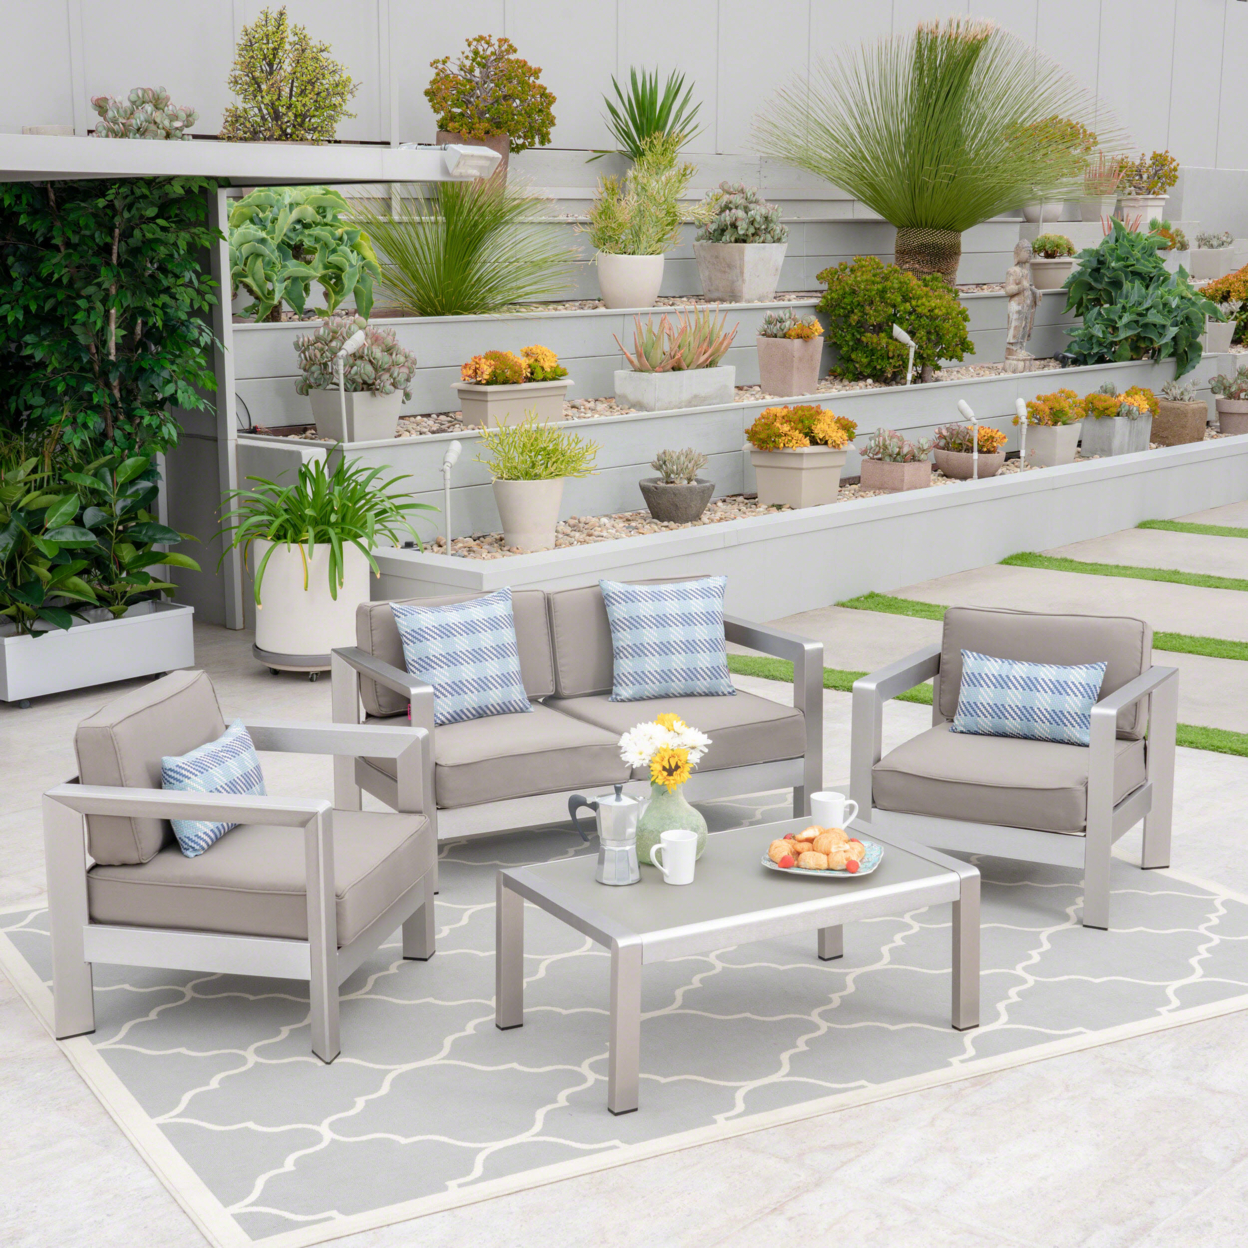 Kenia Outdoor 4-Seater Aluminum Chat Set With Tempered Glass-Topped Coffee Table - Silver + Khaki